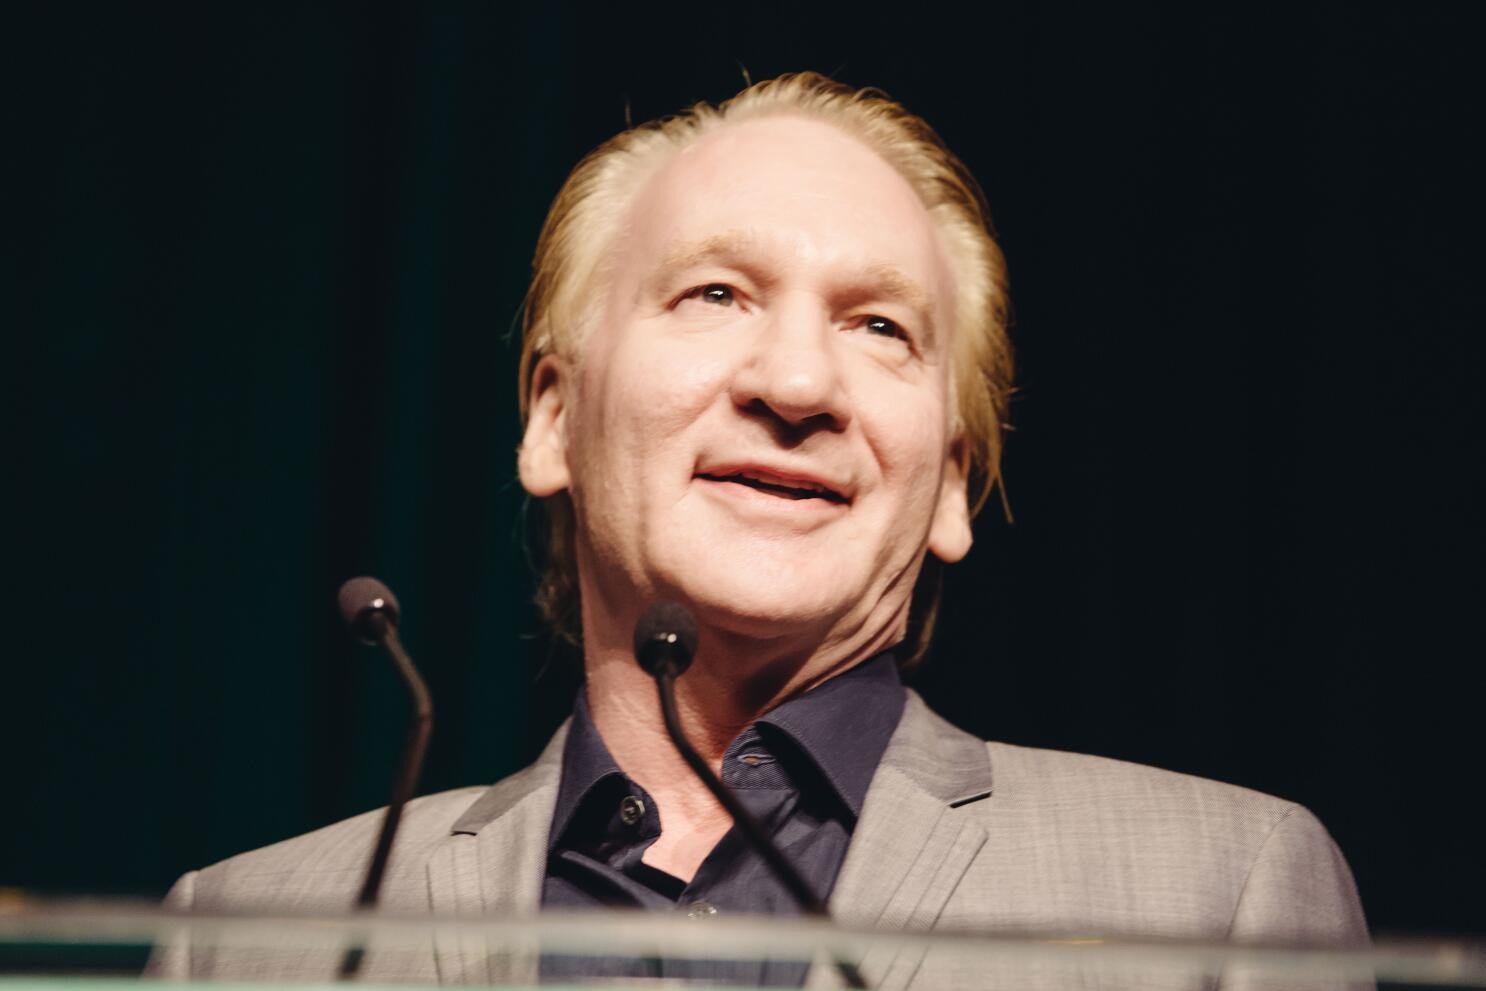 Bill Maher, winner of the First Amendment Award, speaks to the crowd at the 26th Annual Literary Awards Festival at the Beverly Wilshire Hotel on Wednesday, September 28, 2016, in Beverly Hills, Calif (Photo by Casey Curry/Invision/AP)